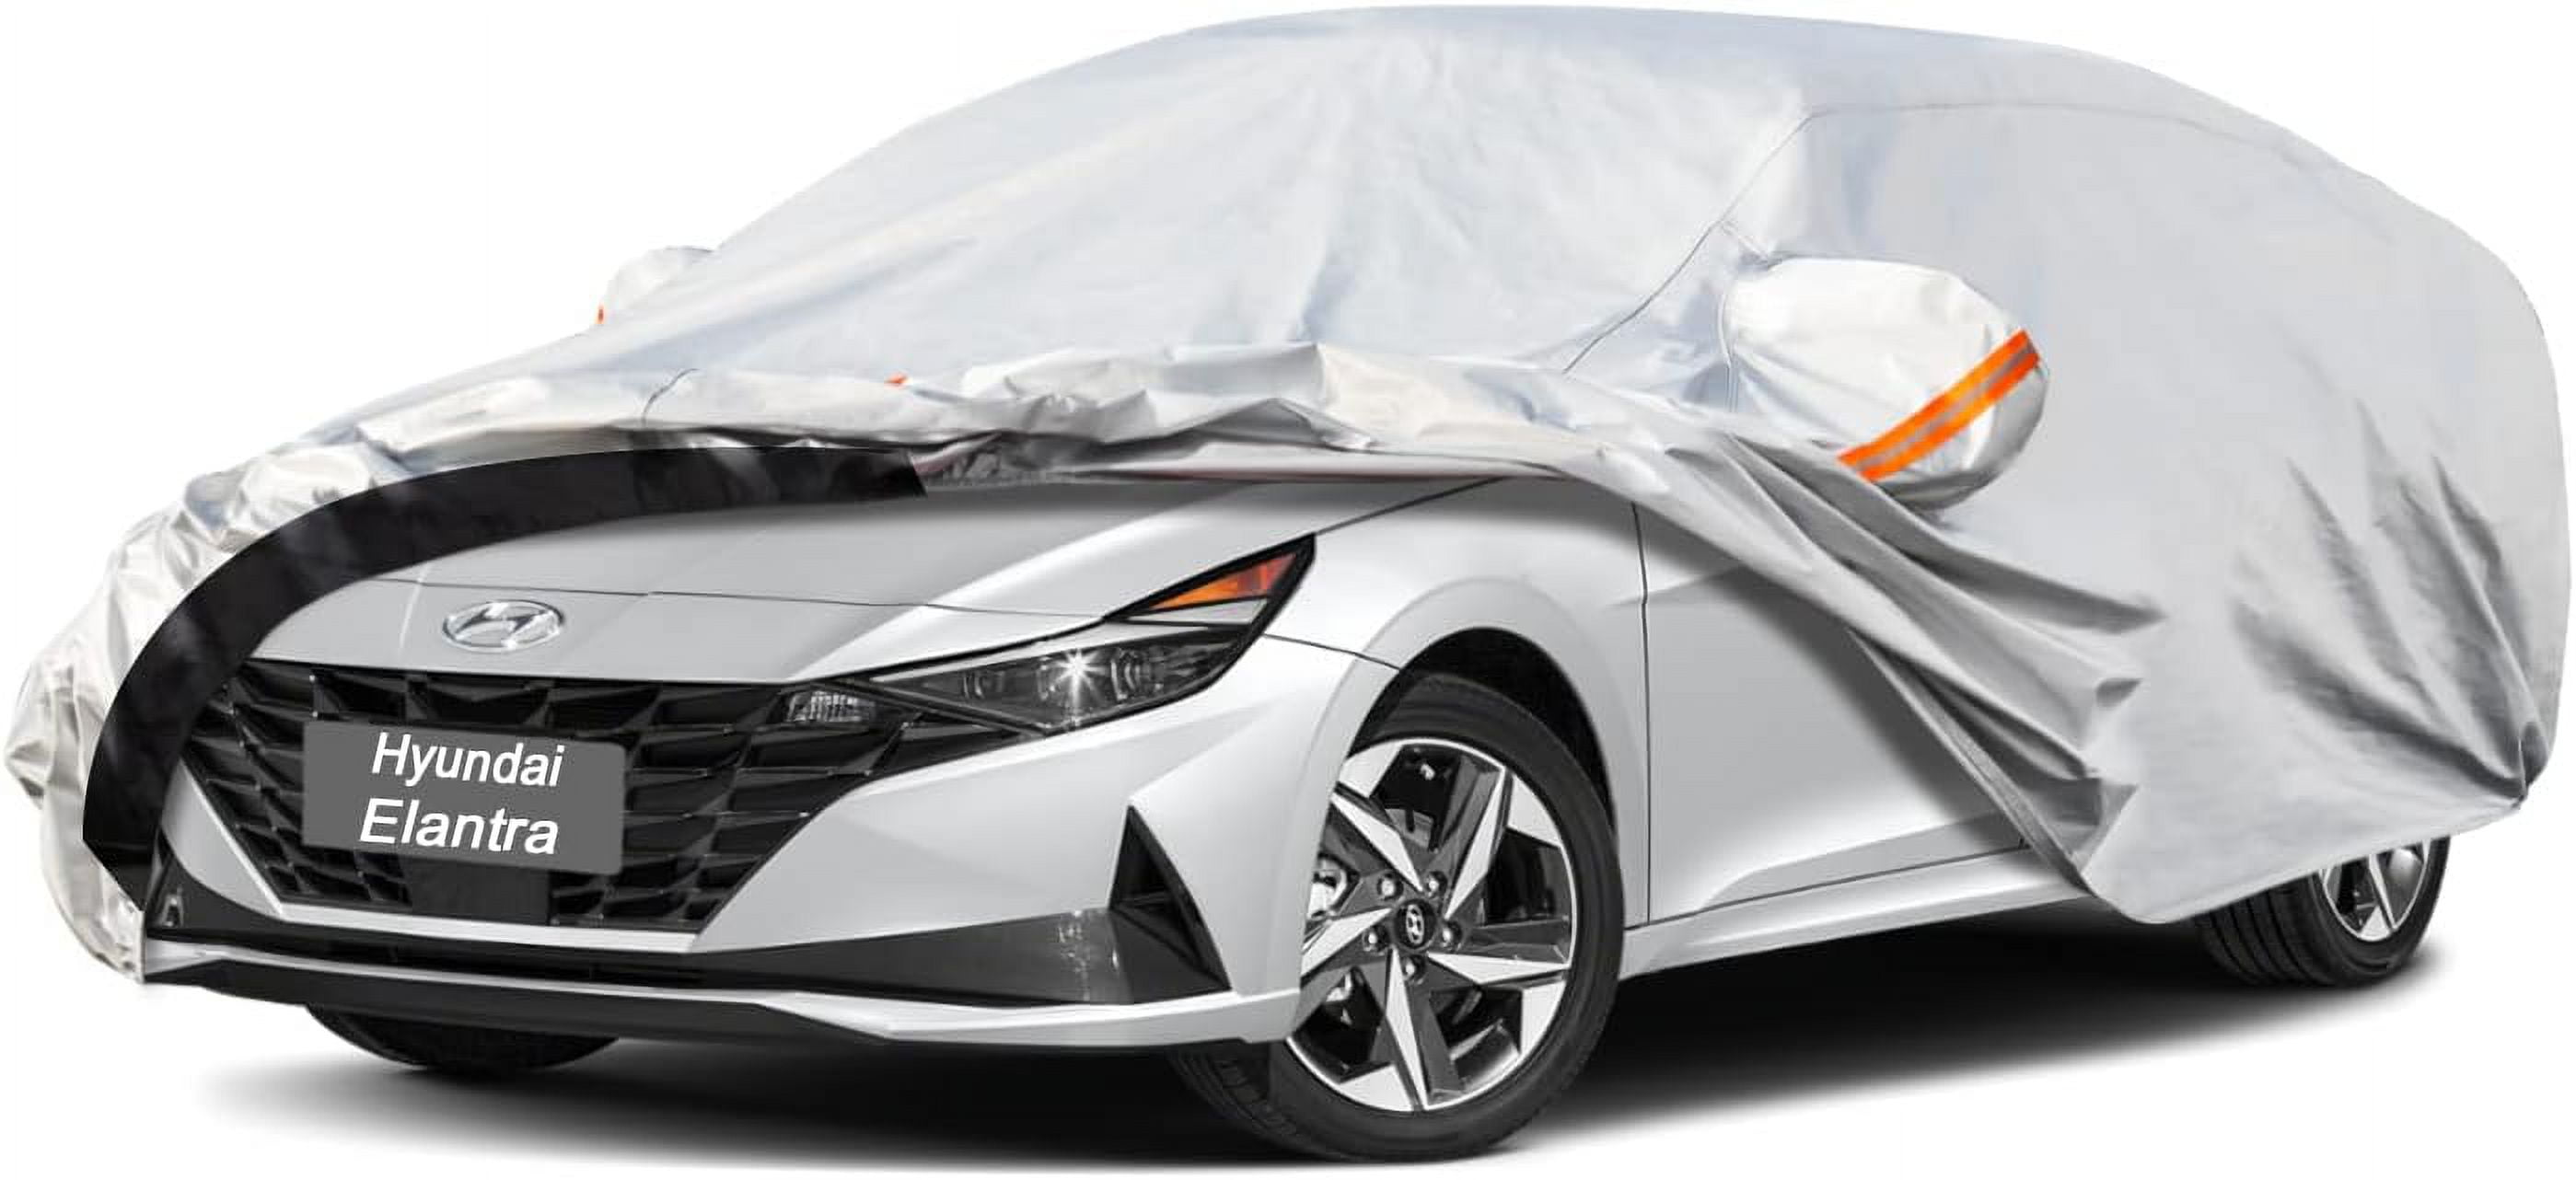 GUNHYI SUV Car Cover for Automobiles All Weather Waterproof